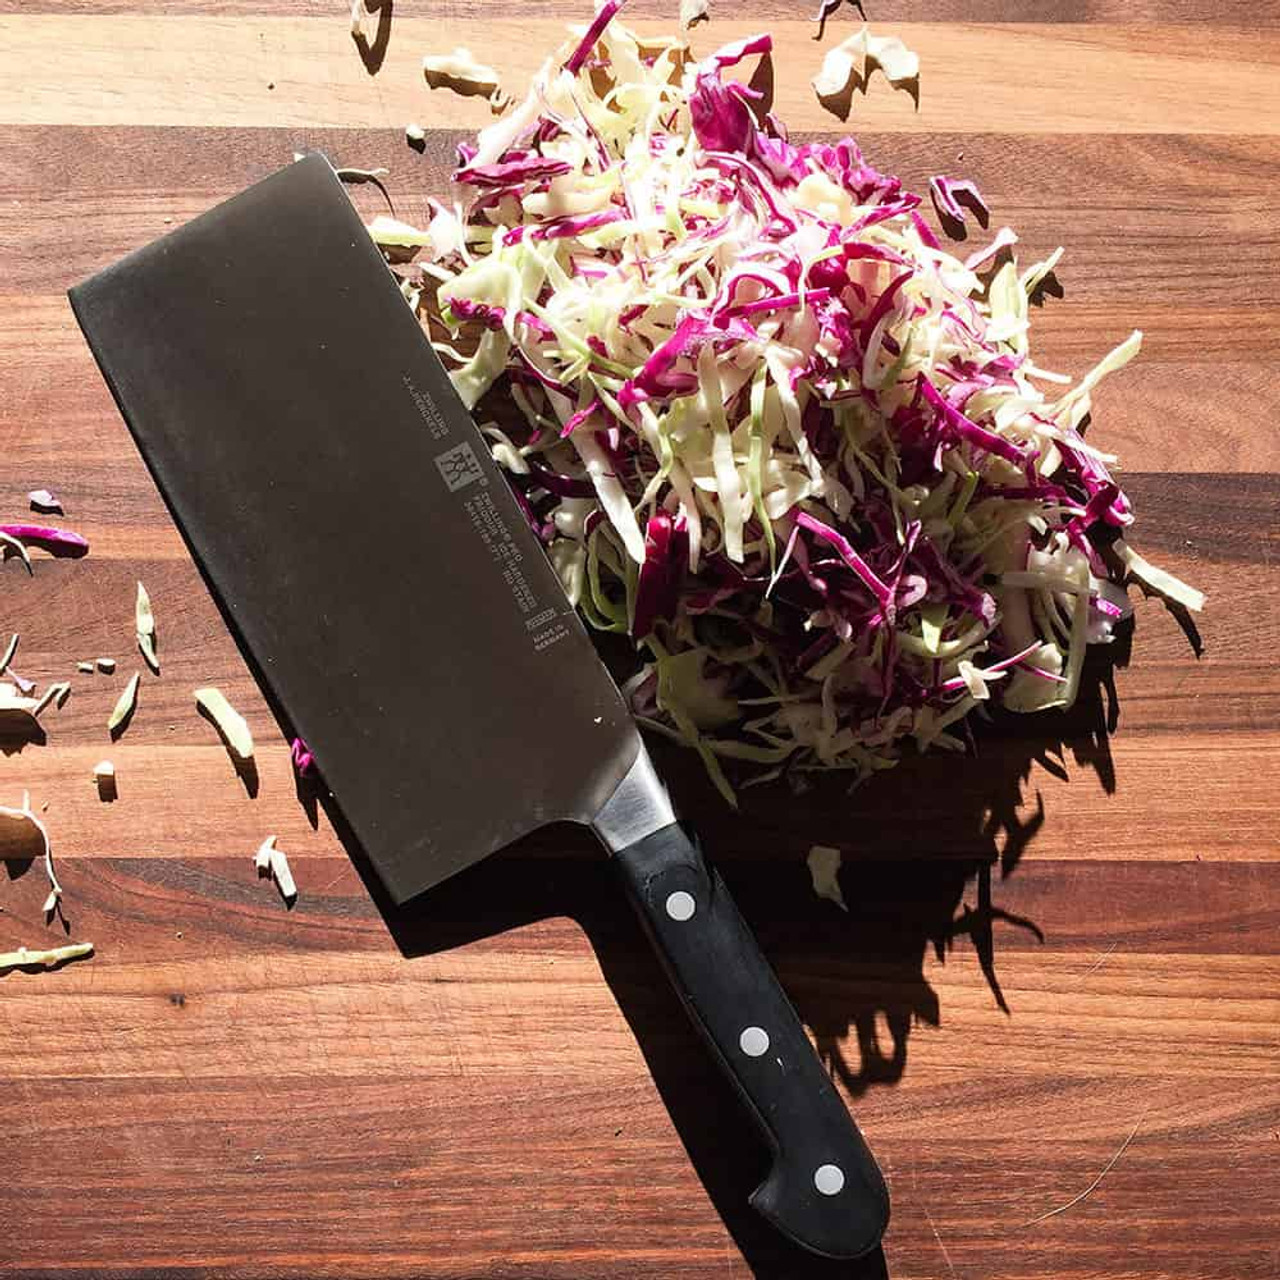 https://cdn11.bigcommerce.com/s-hccytny0od/images/stencil/1280x1280/products/657/995/zwilling-pro-vegetable-cleaver-1__56726.1509975372.jpg?c=2?imbypass=on